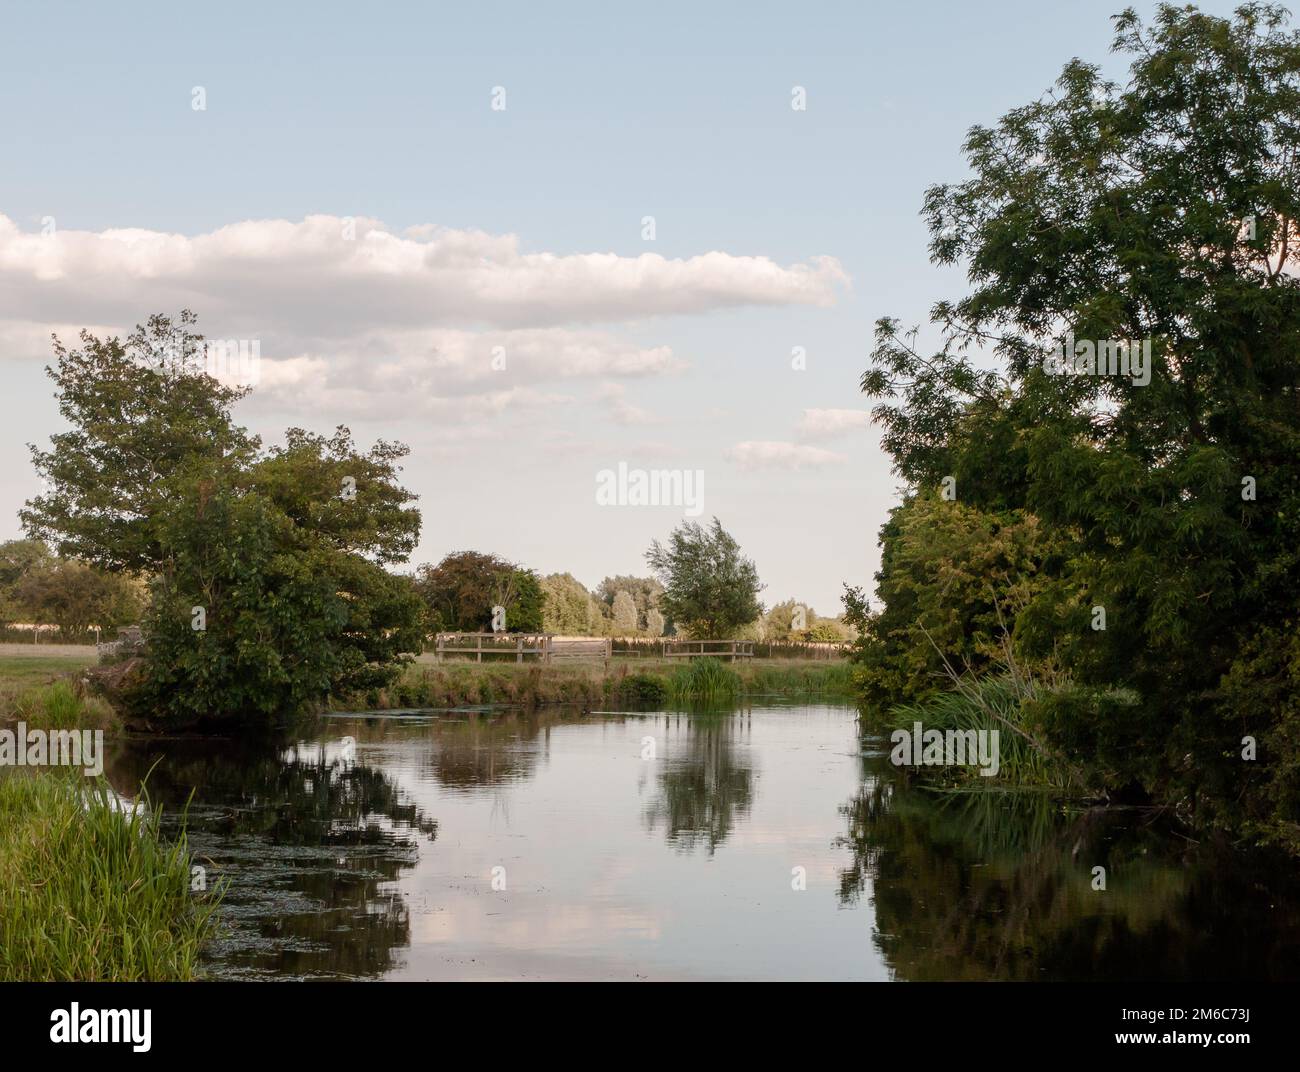 A beautiful country scene of the stour river in dedham with trees reflected in the water Stock Photo